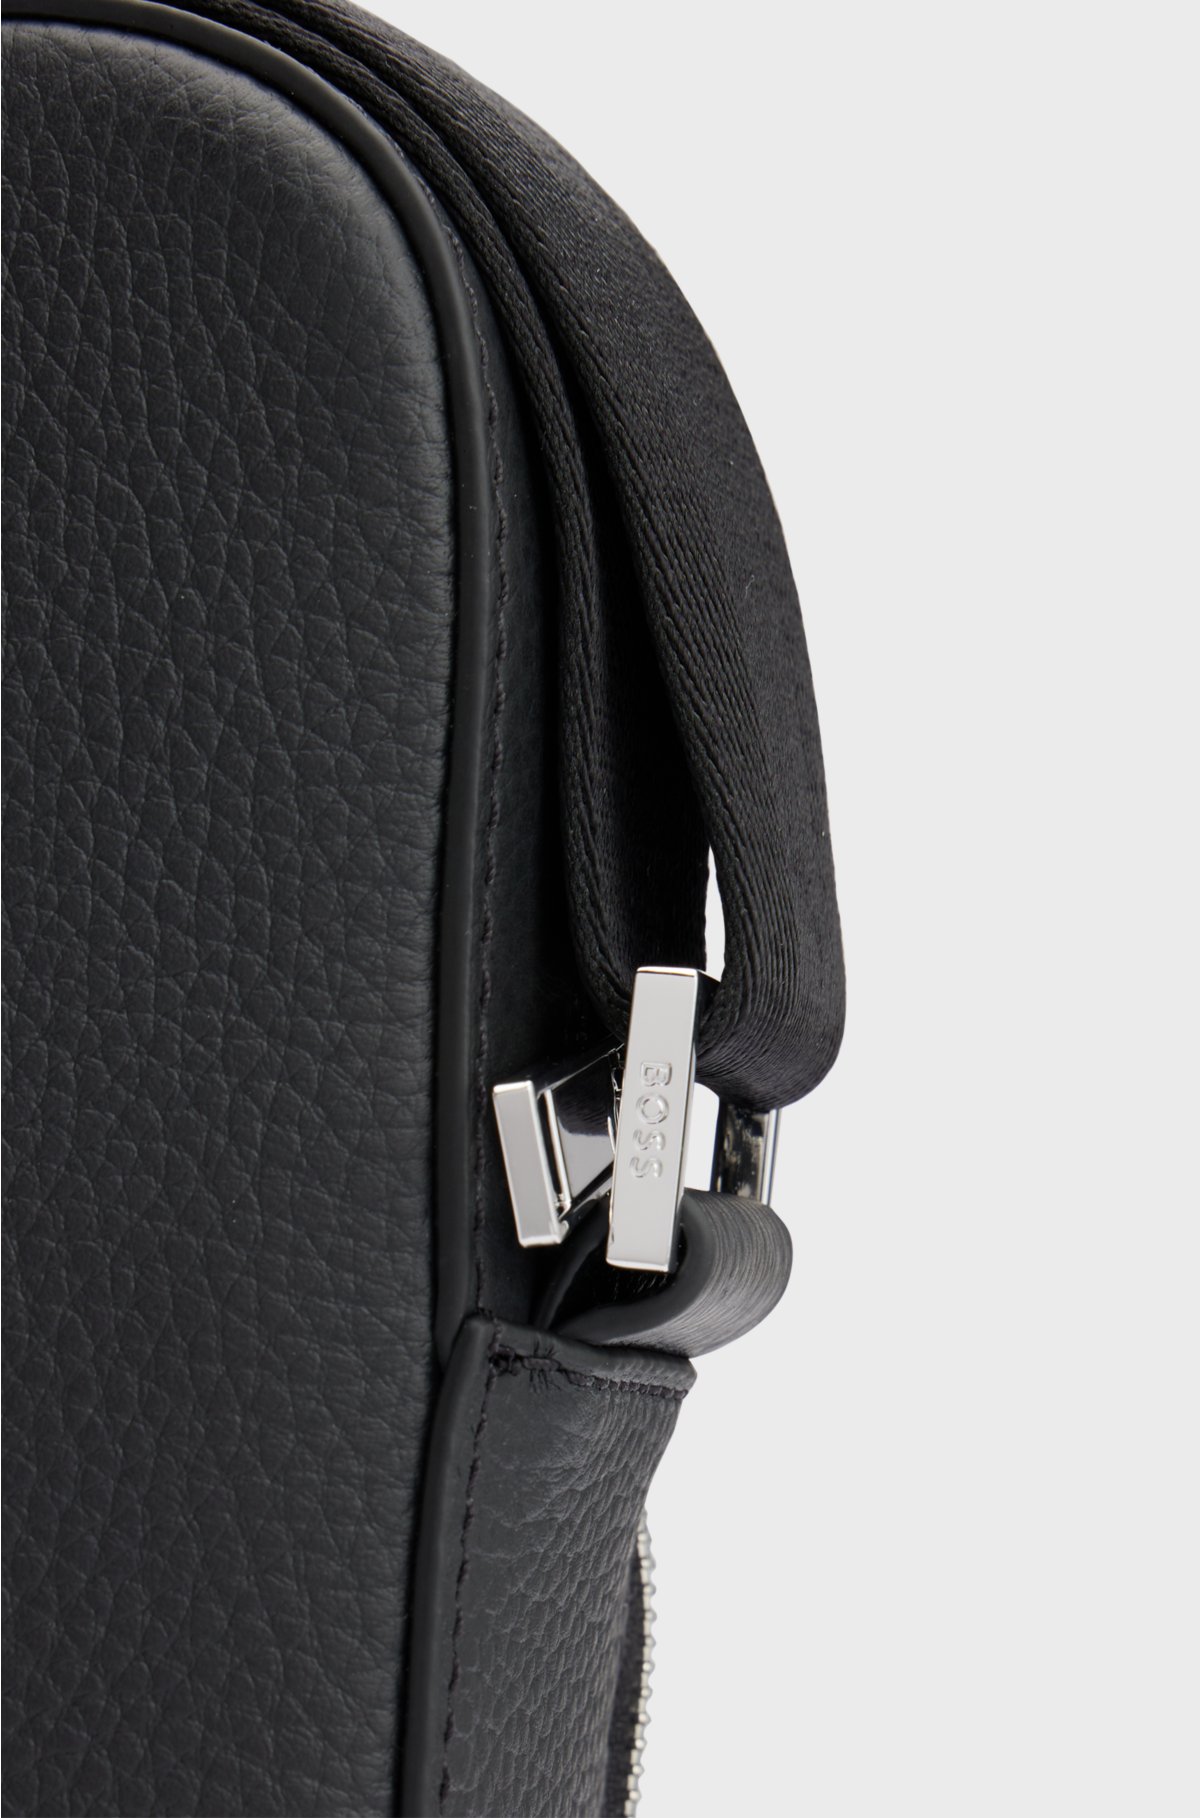 Reporter bag in grained Italian leather with embossed logo, Black